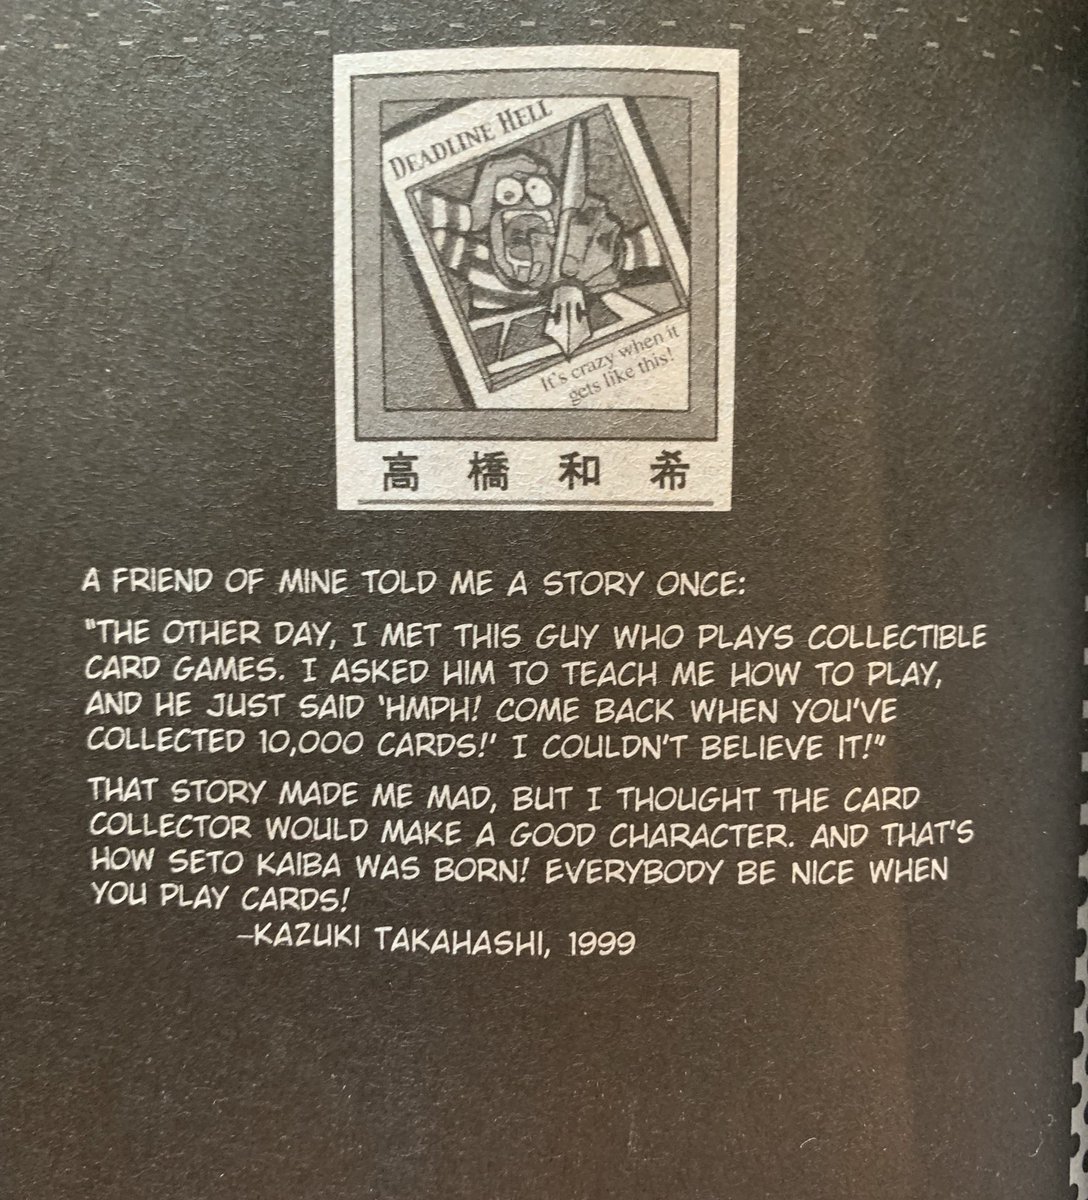 Of course Seto Kaiba was based off of some gatekeeping asshole that one of Takahashi’s friends happen to come across.